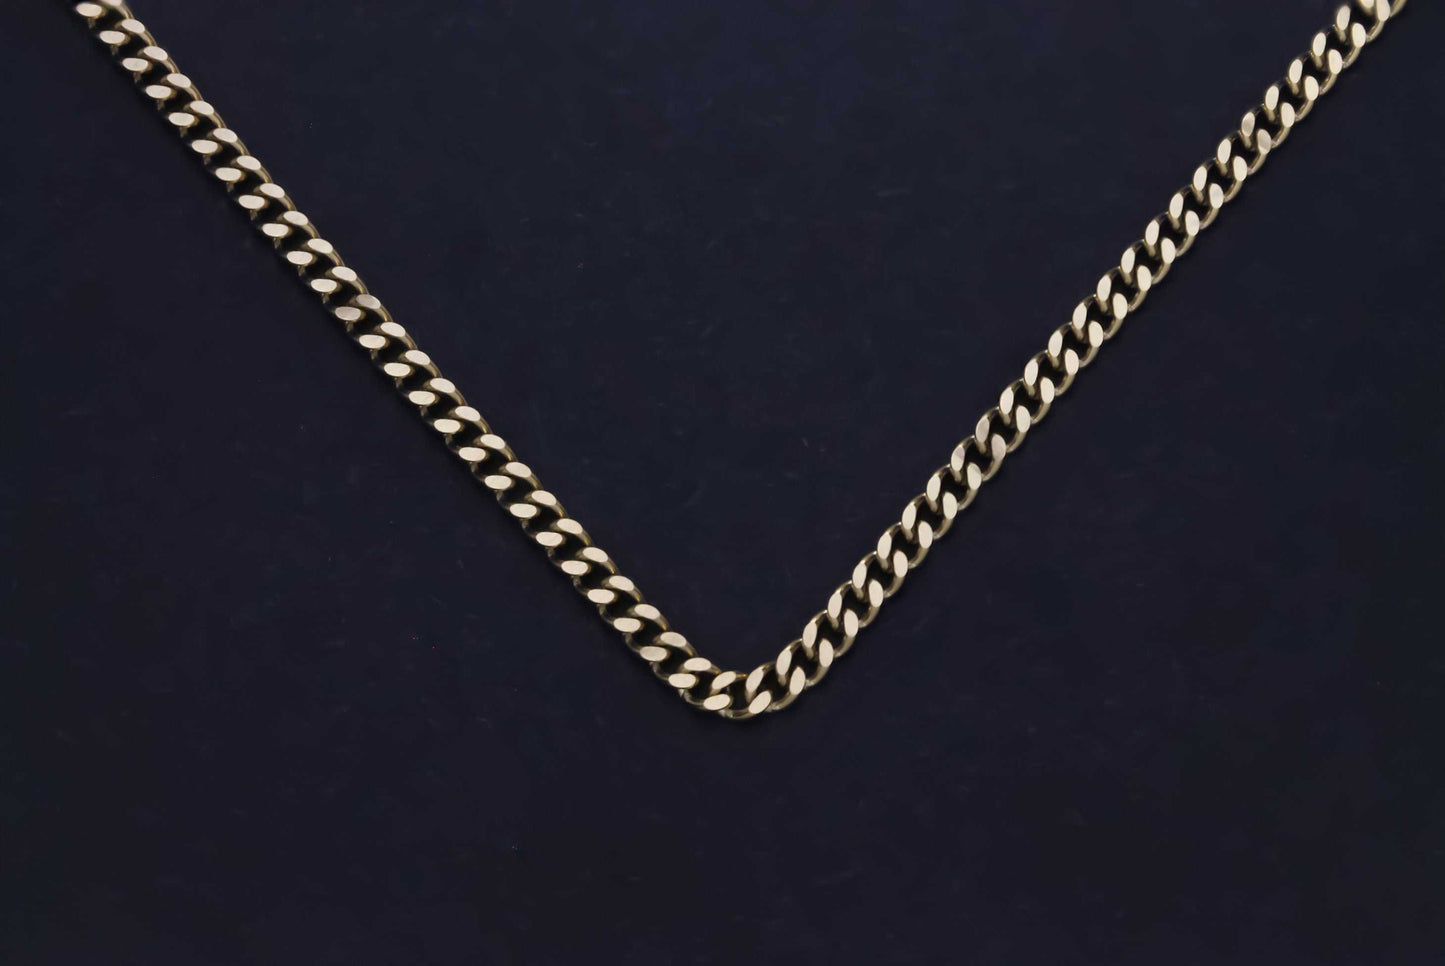 CRW Alien Head Necklace with 3mm miami cuban link chain in gold - Futuristic Necklaces for Women - Necklace for Men - Necklace with Pendant